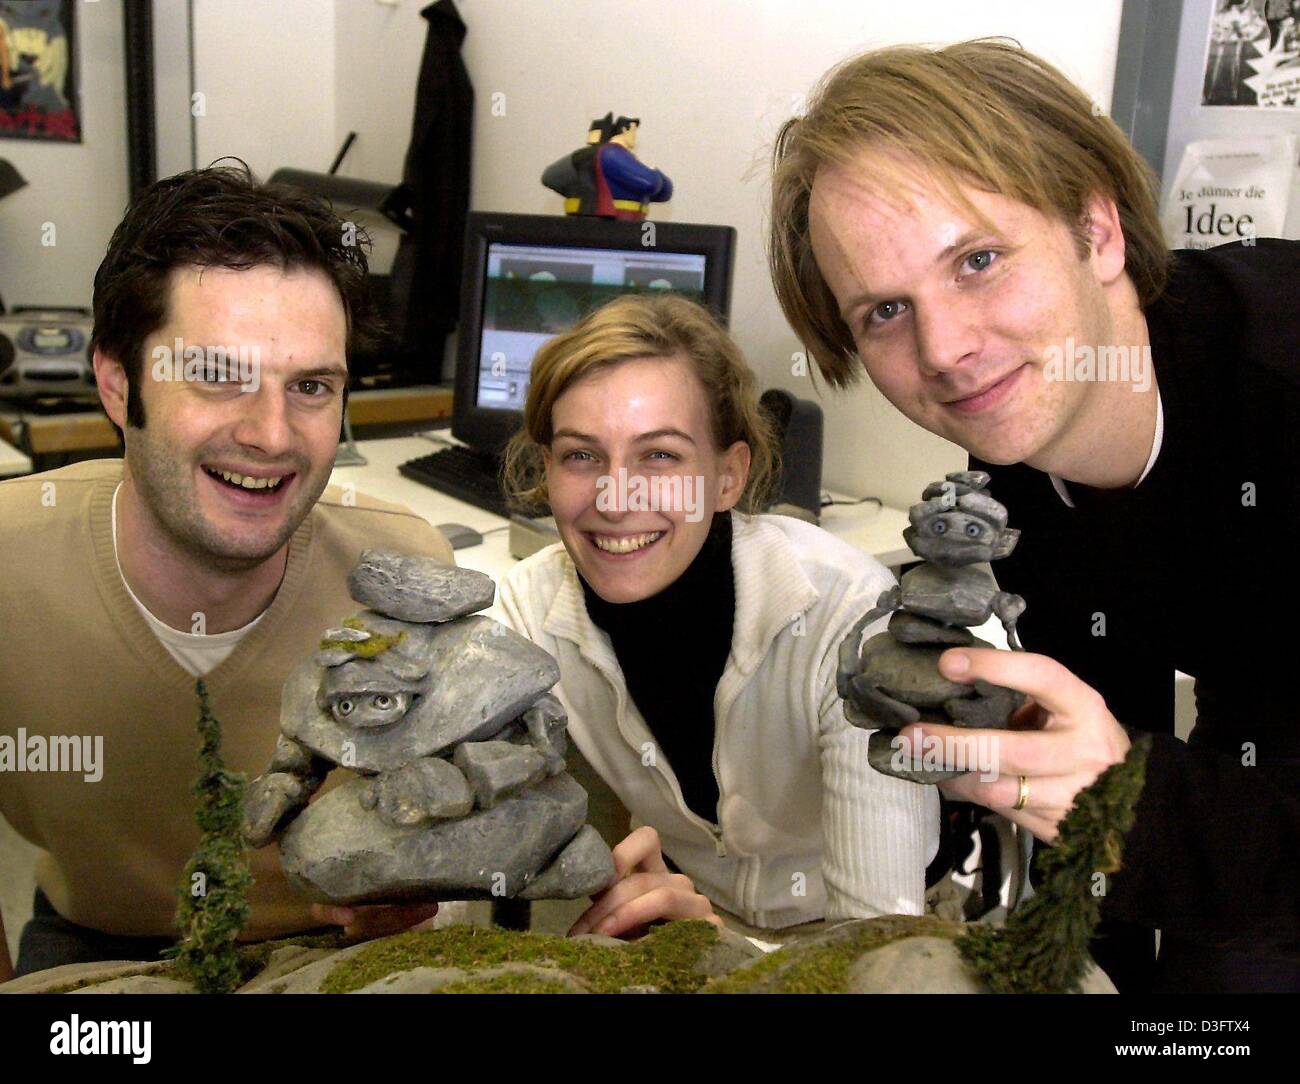 (dpa) - Film producer Georg Gruber (L) and the directors Heidi Wittlinger and Chris Stenner present the 'protagonists' of their animated short film 'Das Rad' (the wheel) at the Filmakademie in Ludwigsburg, Germany, 24 February 2003. Their 9-minutes long film was nominated for the Oscar as Best Animated Short Film. 'Das Rad' was made both with tradtitional stop motion effects as wel Stock Photo